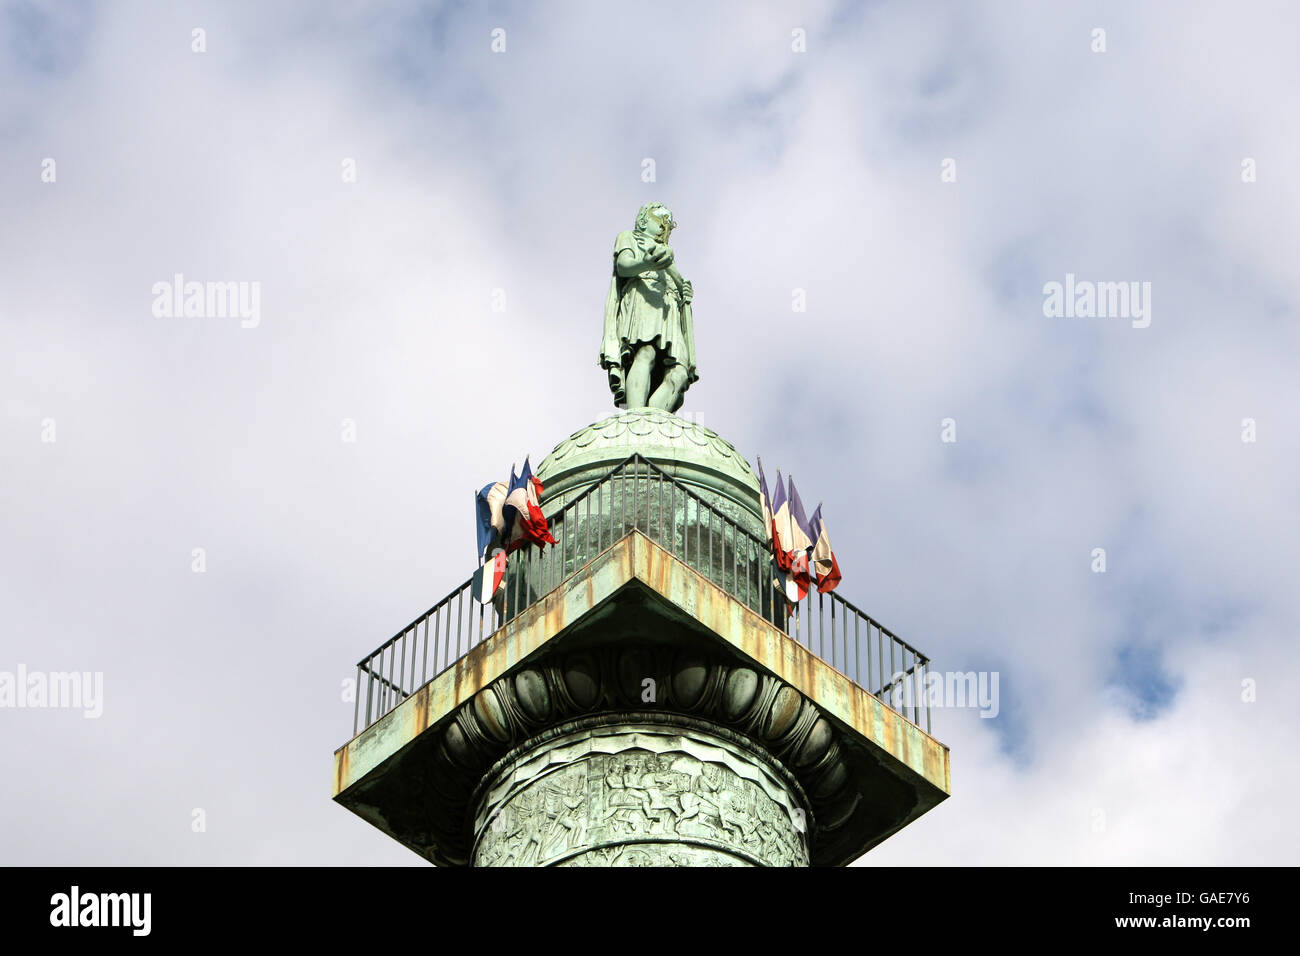 A general view of the Vendome Column at Place Vendome, Paris, France. This is a Monument to Napoleon Victories. Stock Photo